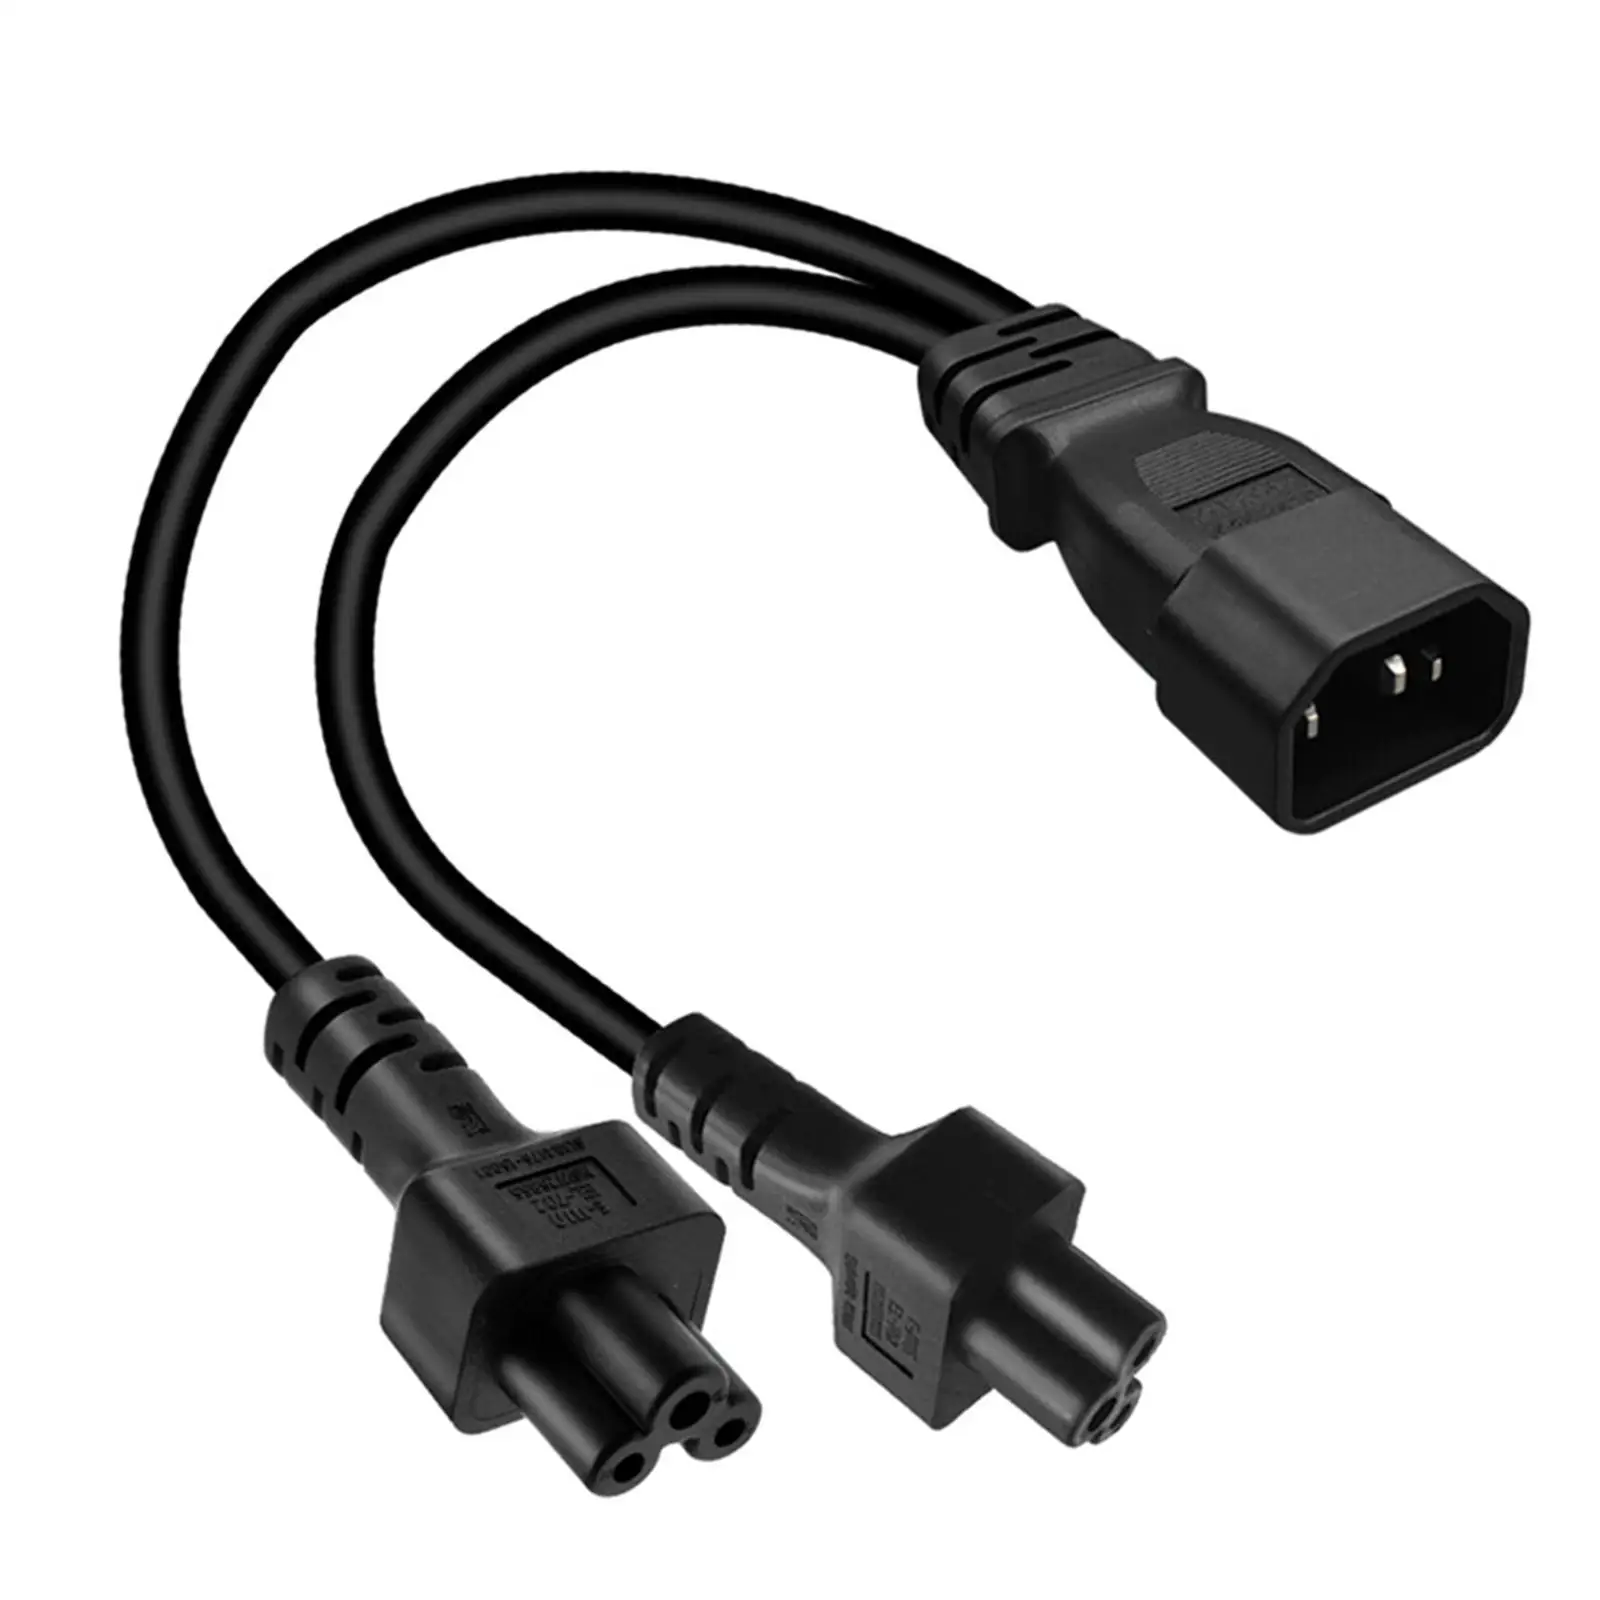 IEC320 C14 to IEC320 Dual C5 Splitter Power Cable Replacement for Computer